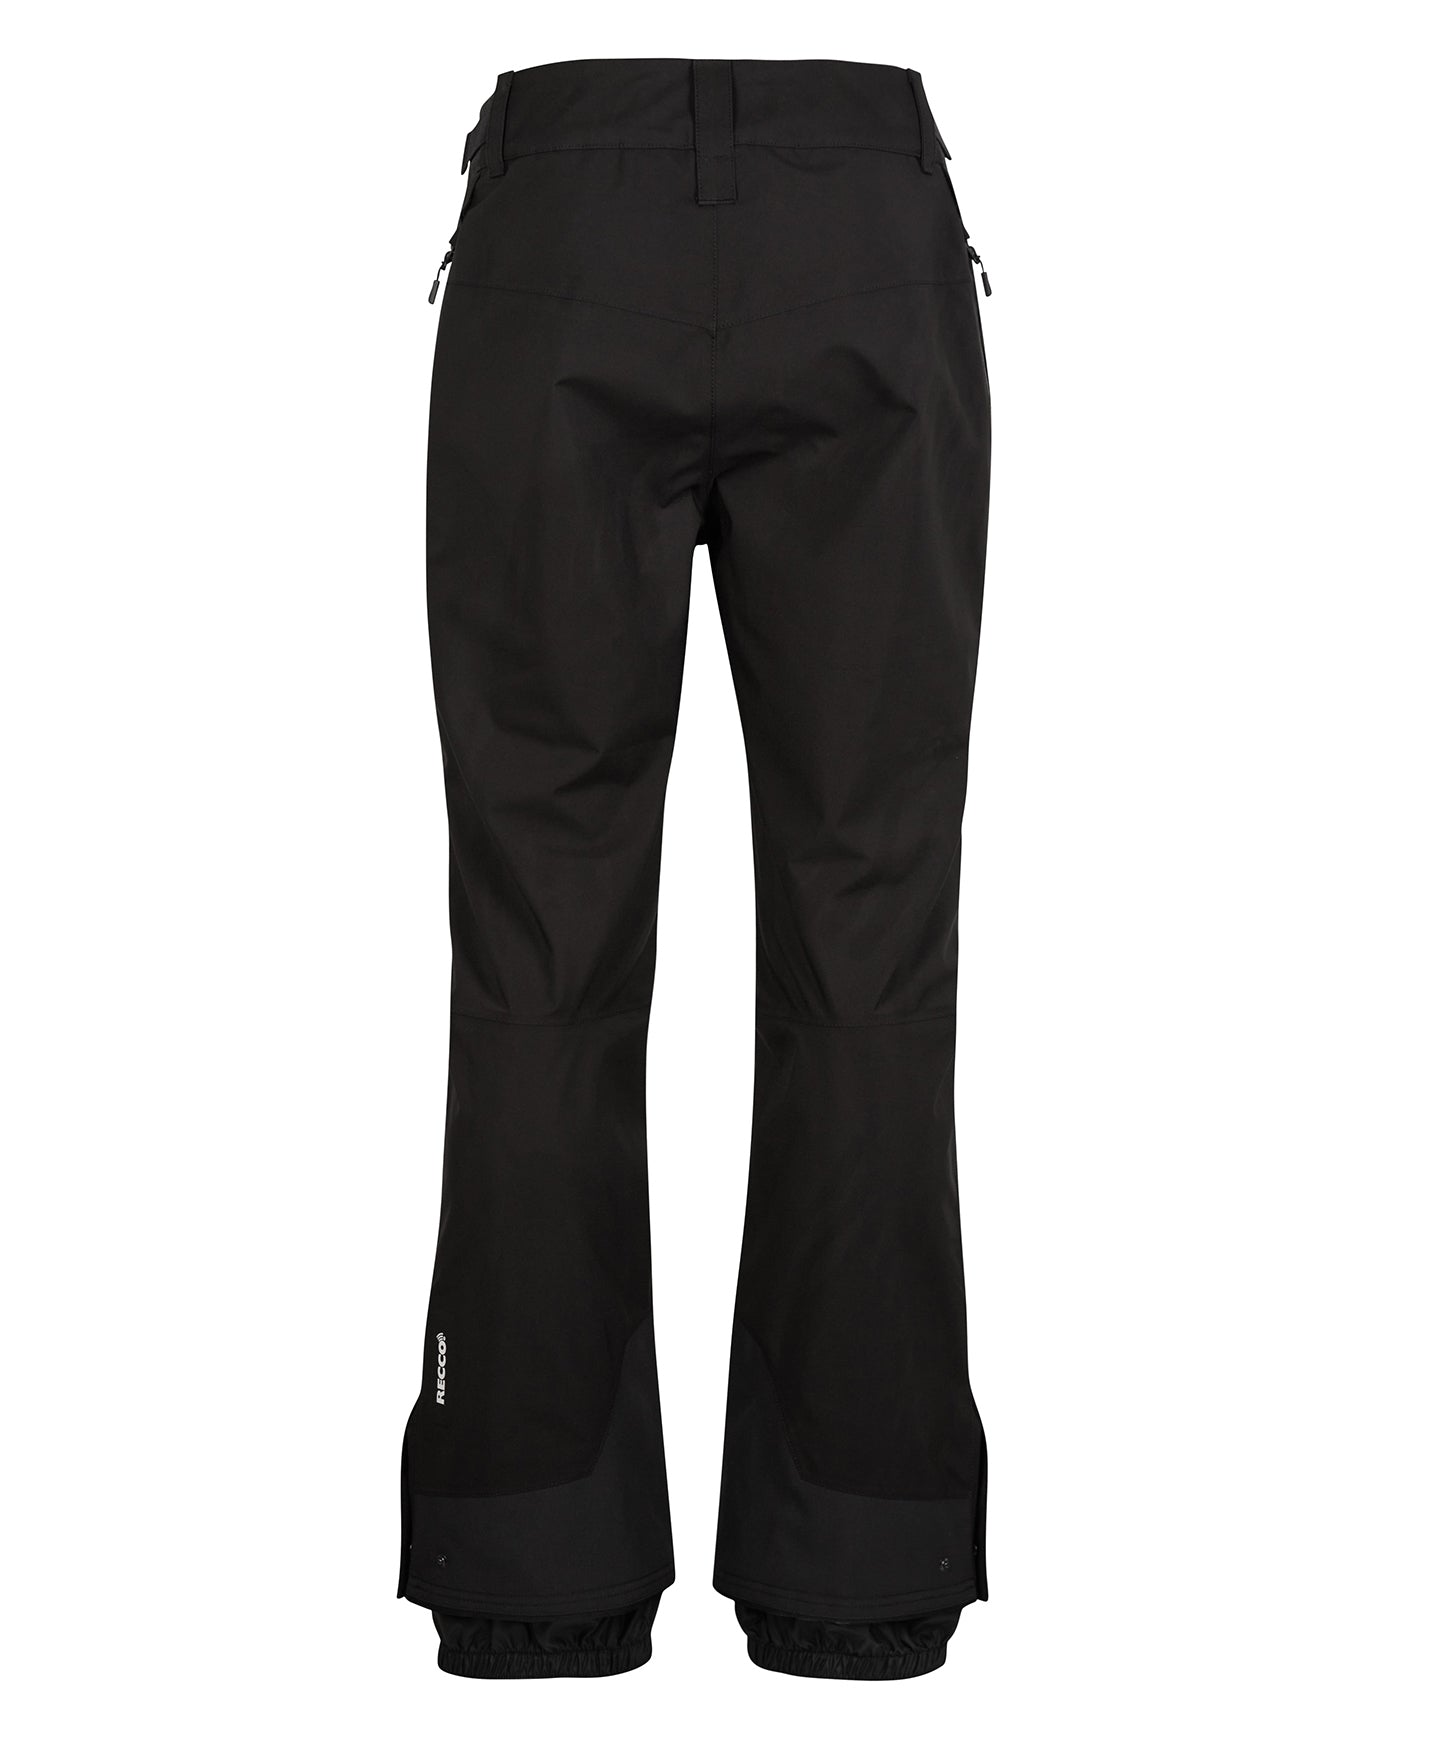 Buy Mens GTX Snow Pants - Black Out by ONeill online